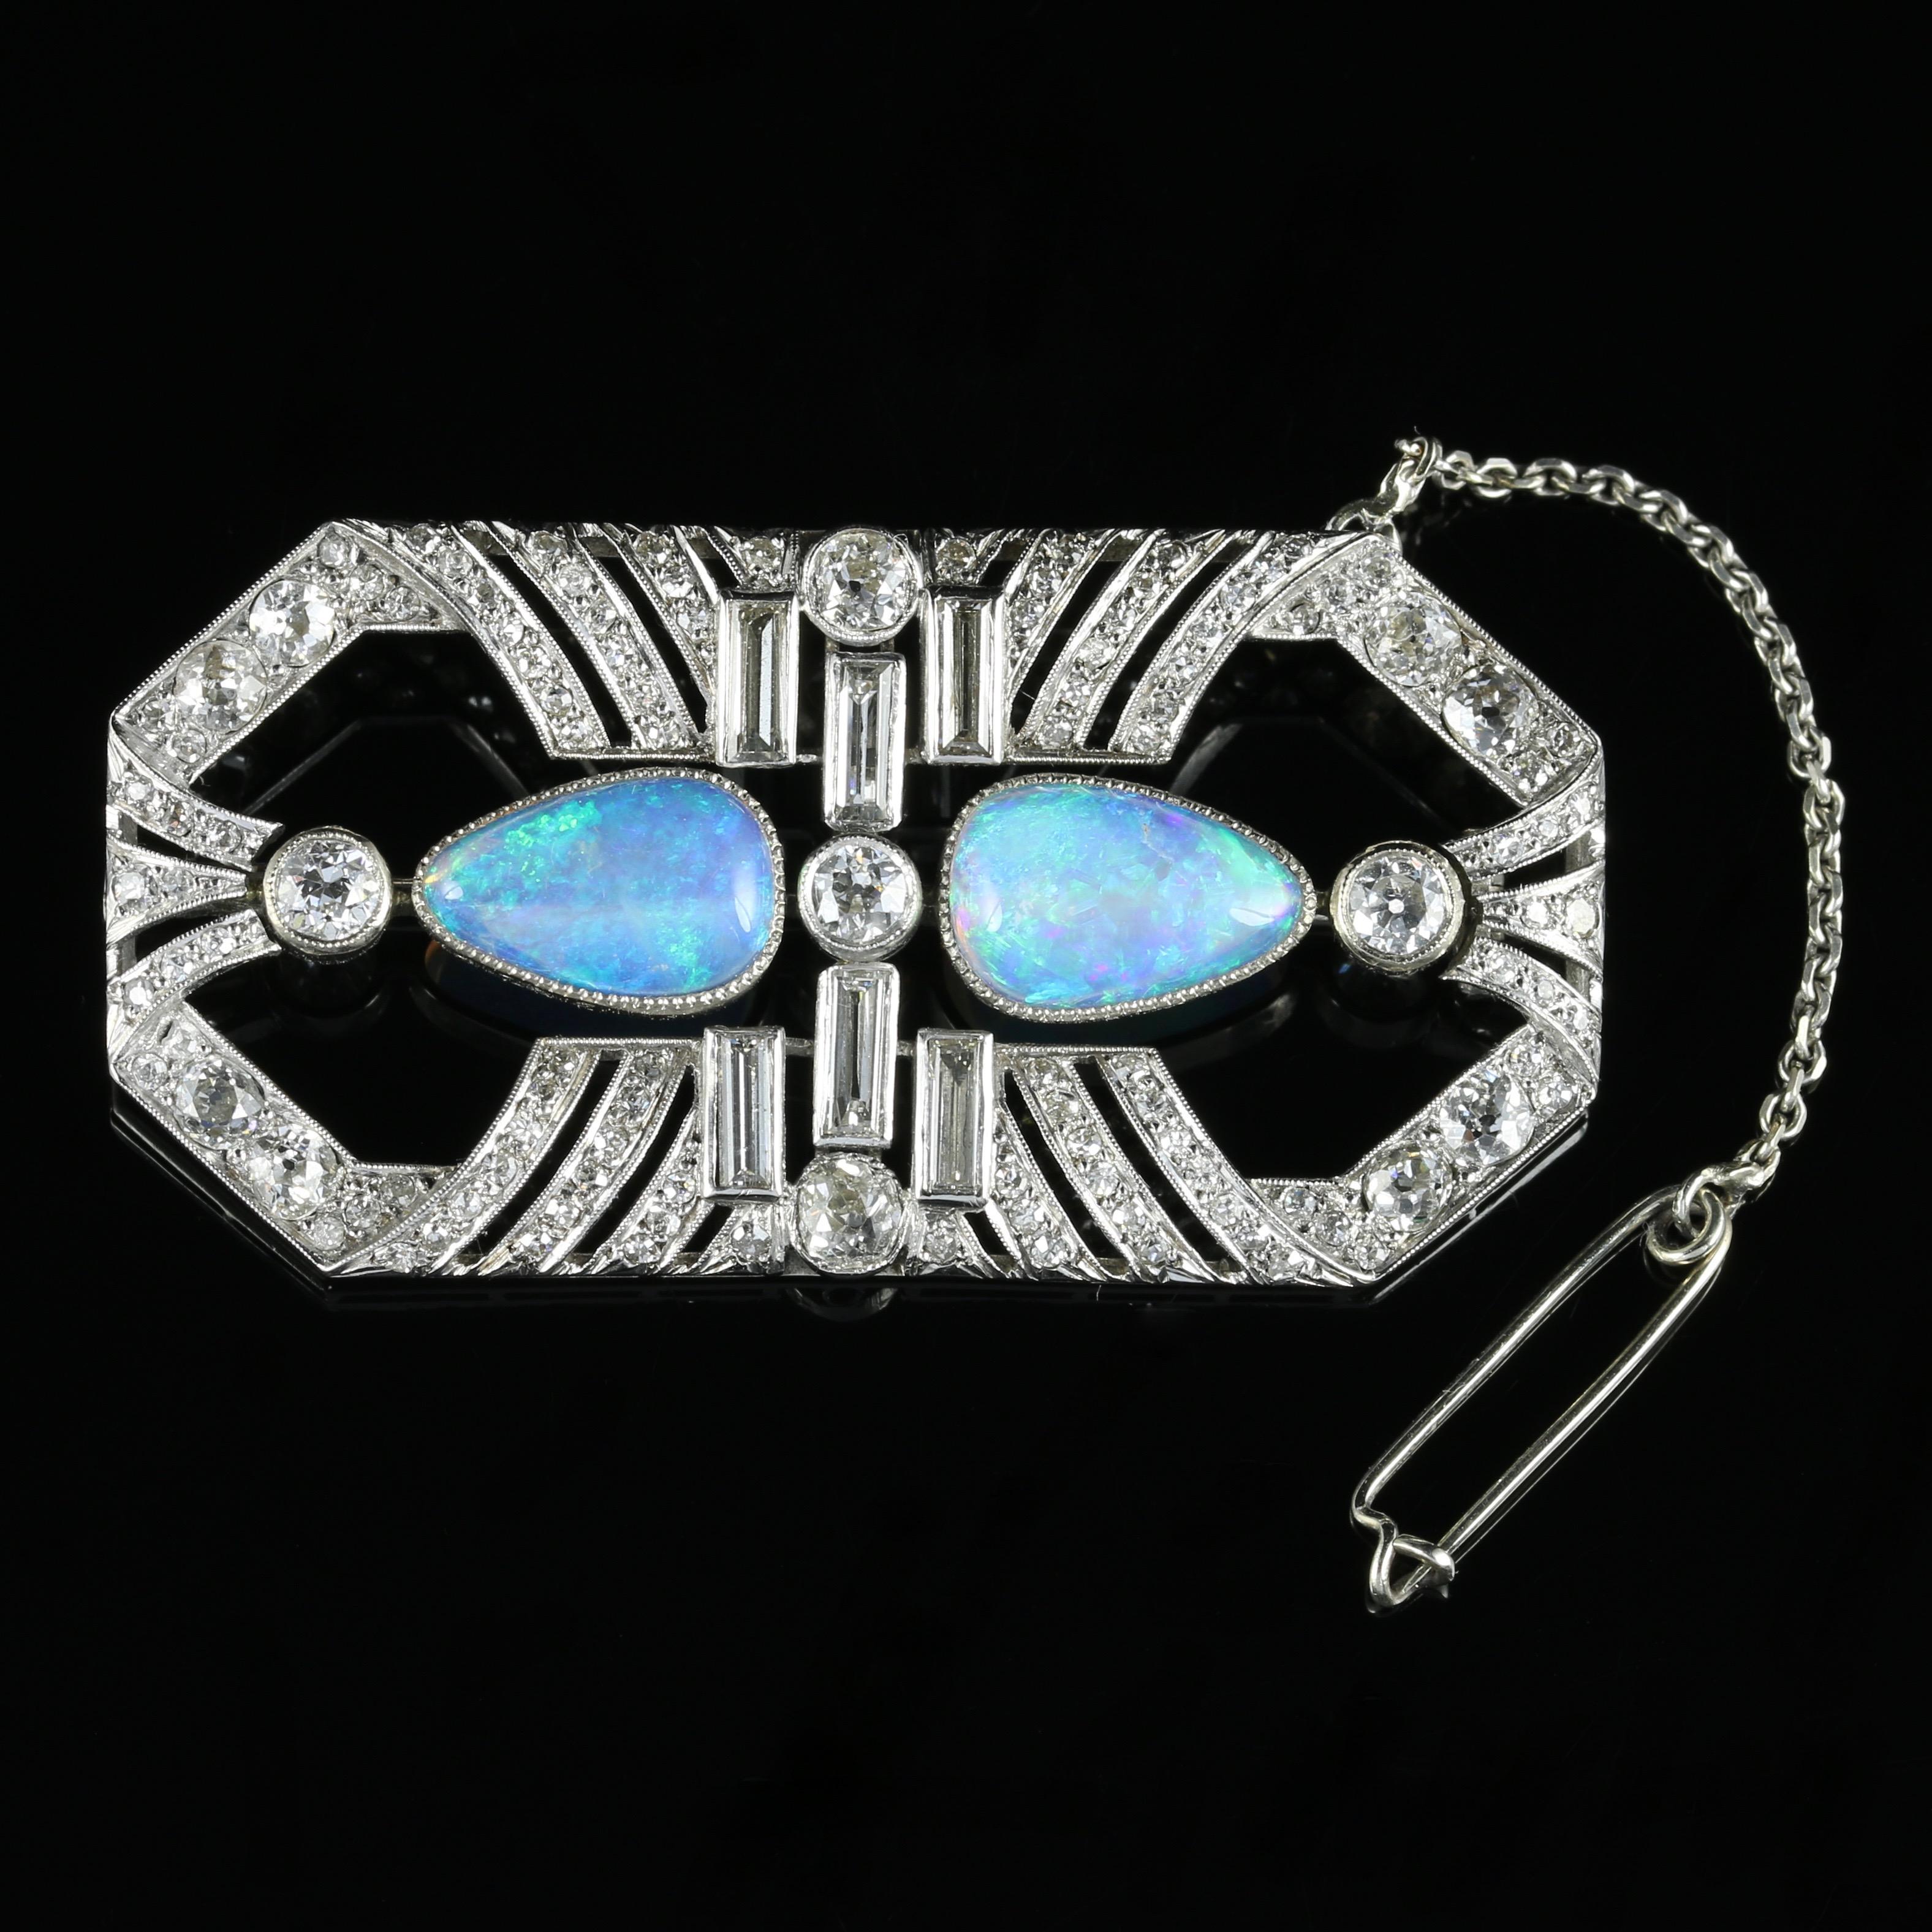 For more details please click continue reading down below...

This is a spectacular example of a genuine Art Deco Diamond and natural Opal brooch, all set in 18ct White Gold.

Each natural Opal is approximately 3ct in size and are a tapered pear